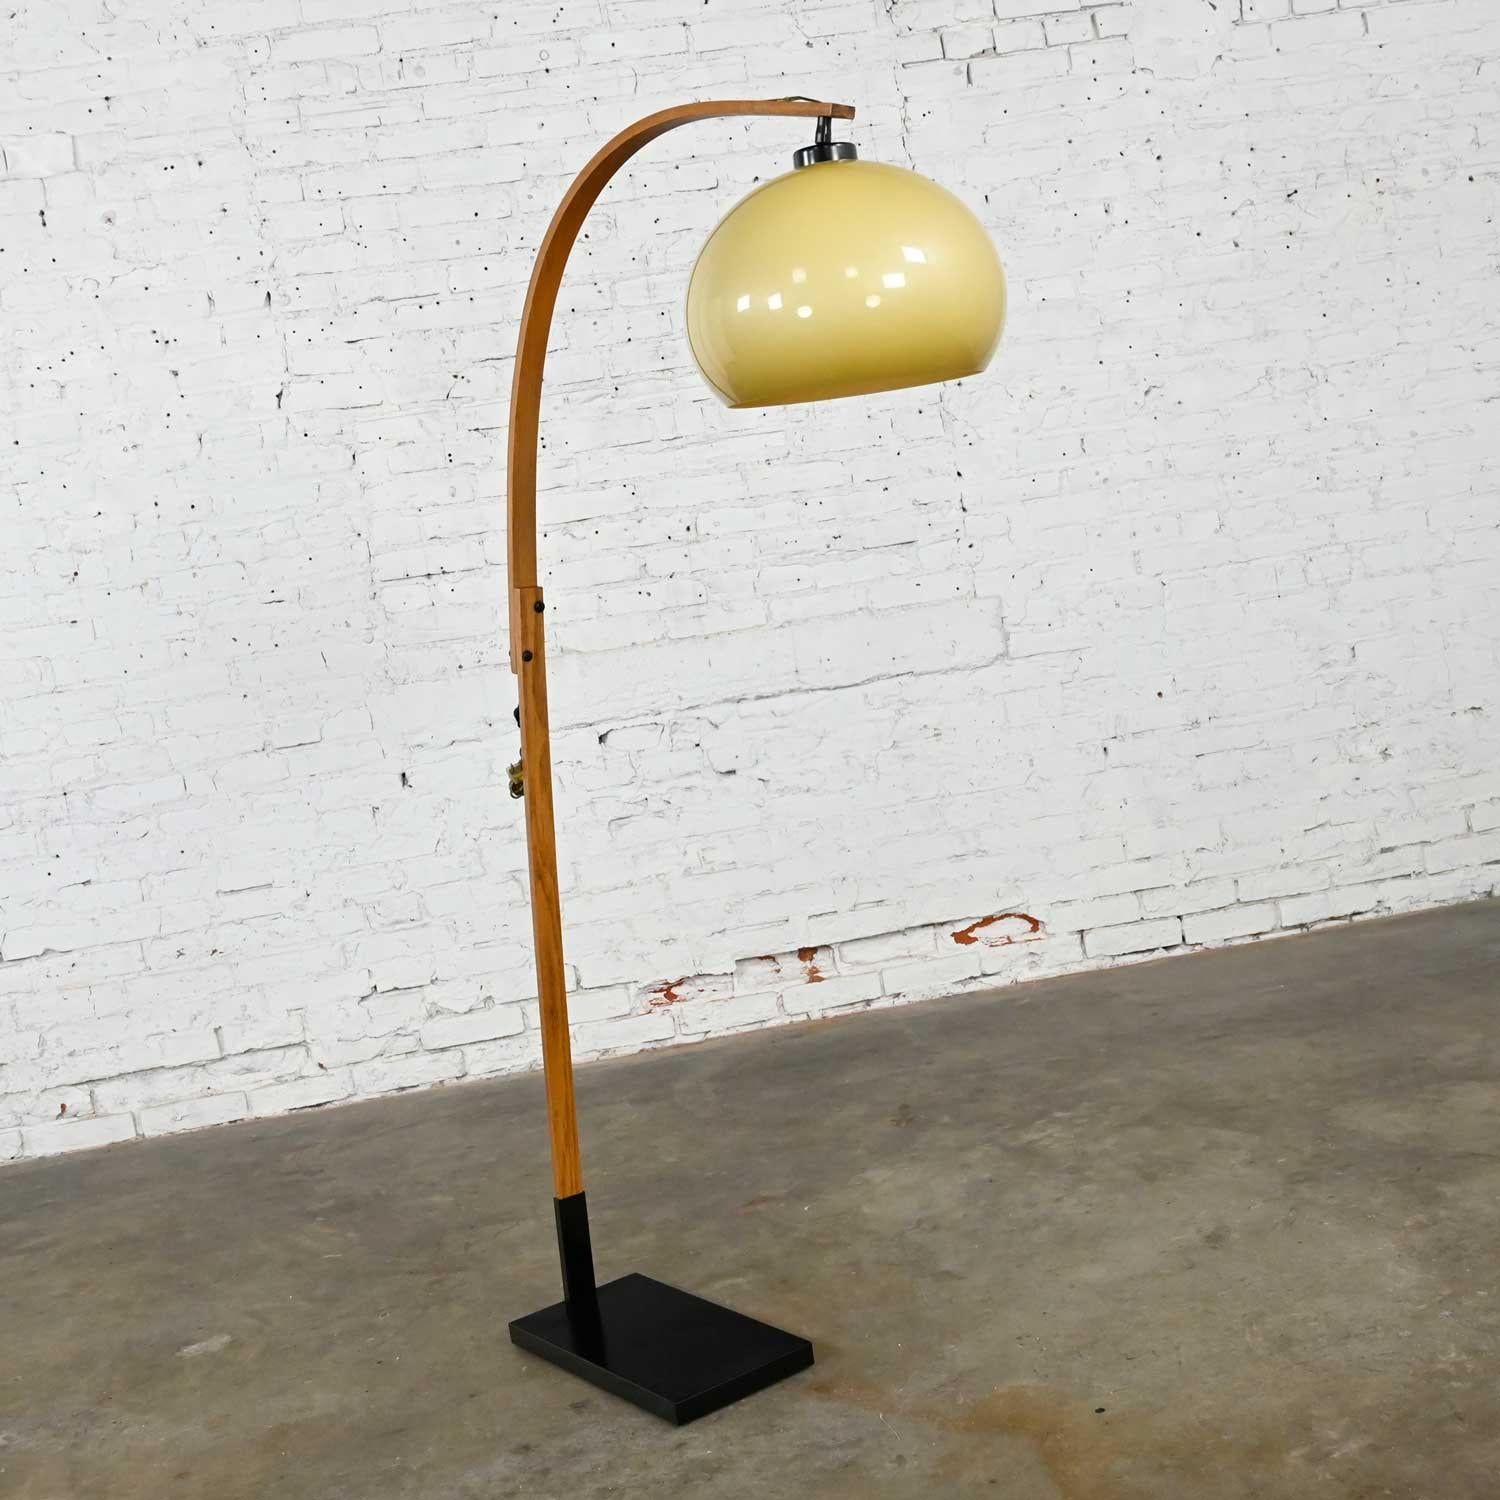 Gorgeous Mid-Century Modern bentwood swoop or arc floor lamp. Comprised of a bentwood stem, black painted iron base, and an adjustable amber plastic bubble globe shade. Beautiful condition, keeping in mind that this is vintage and not new so will